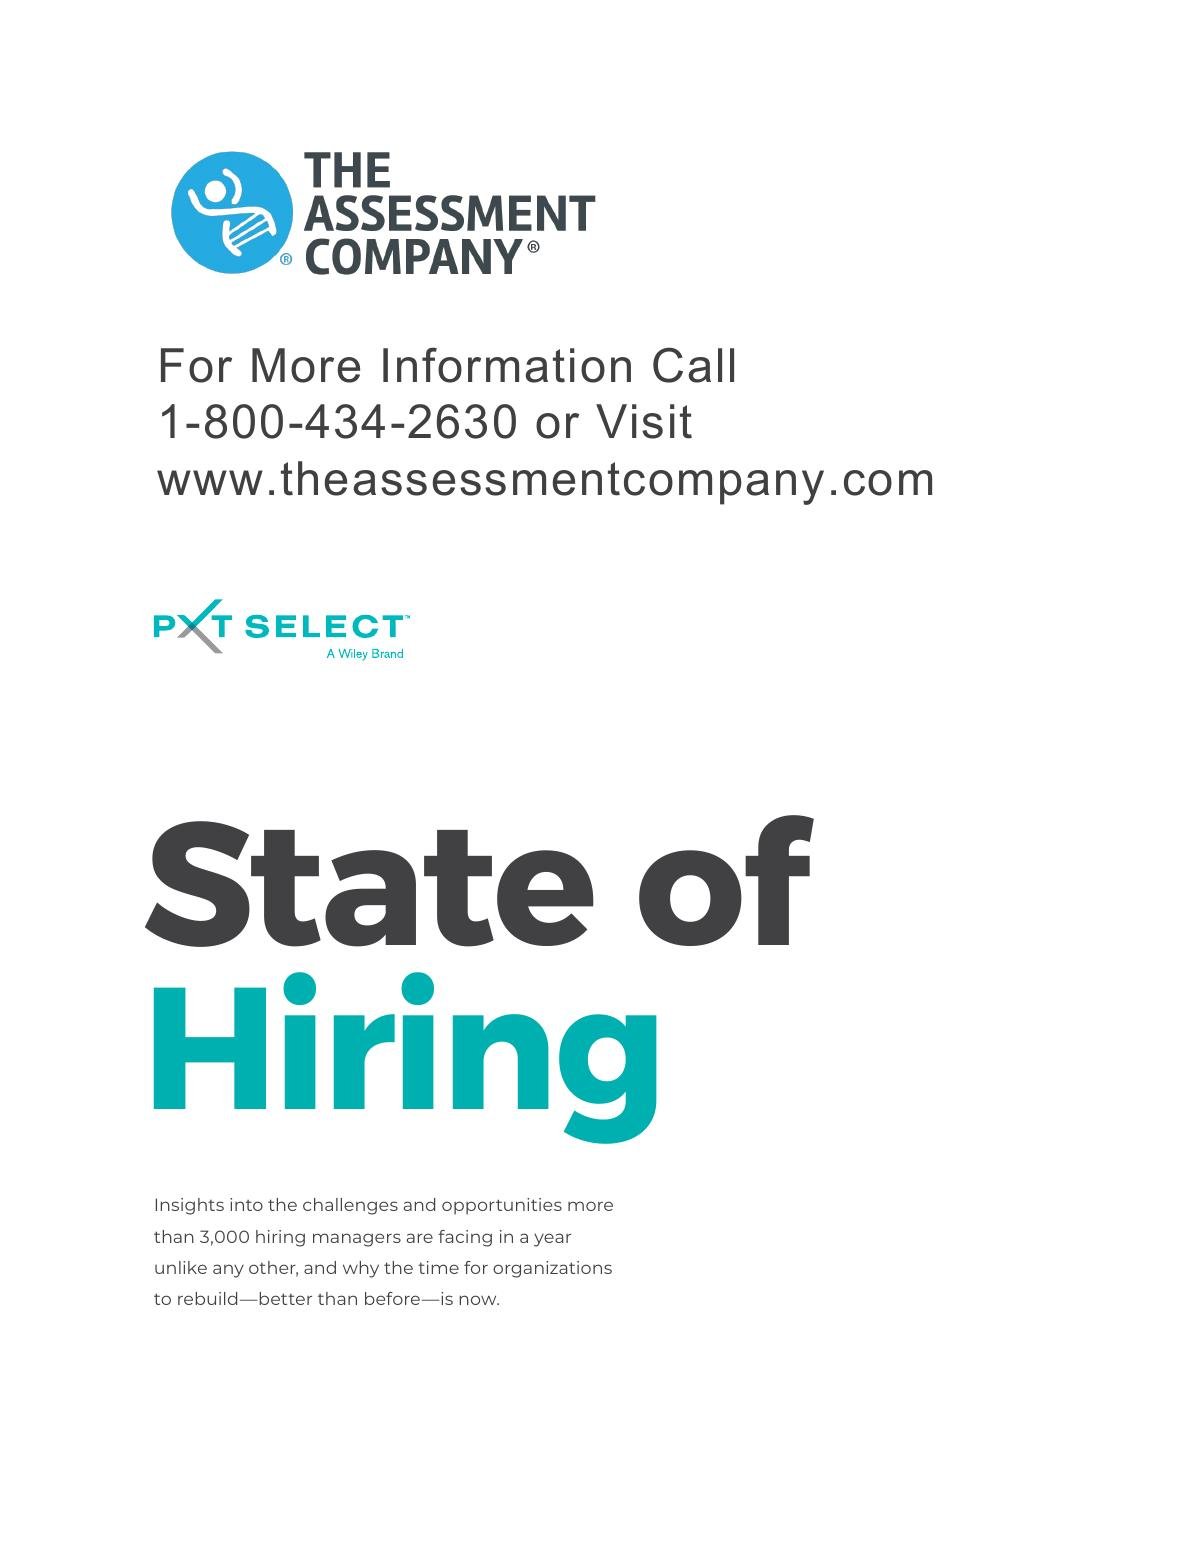 The State of Hiring